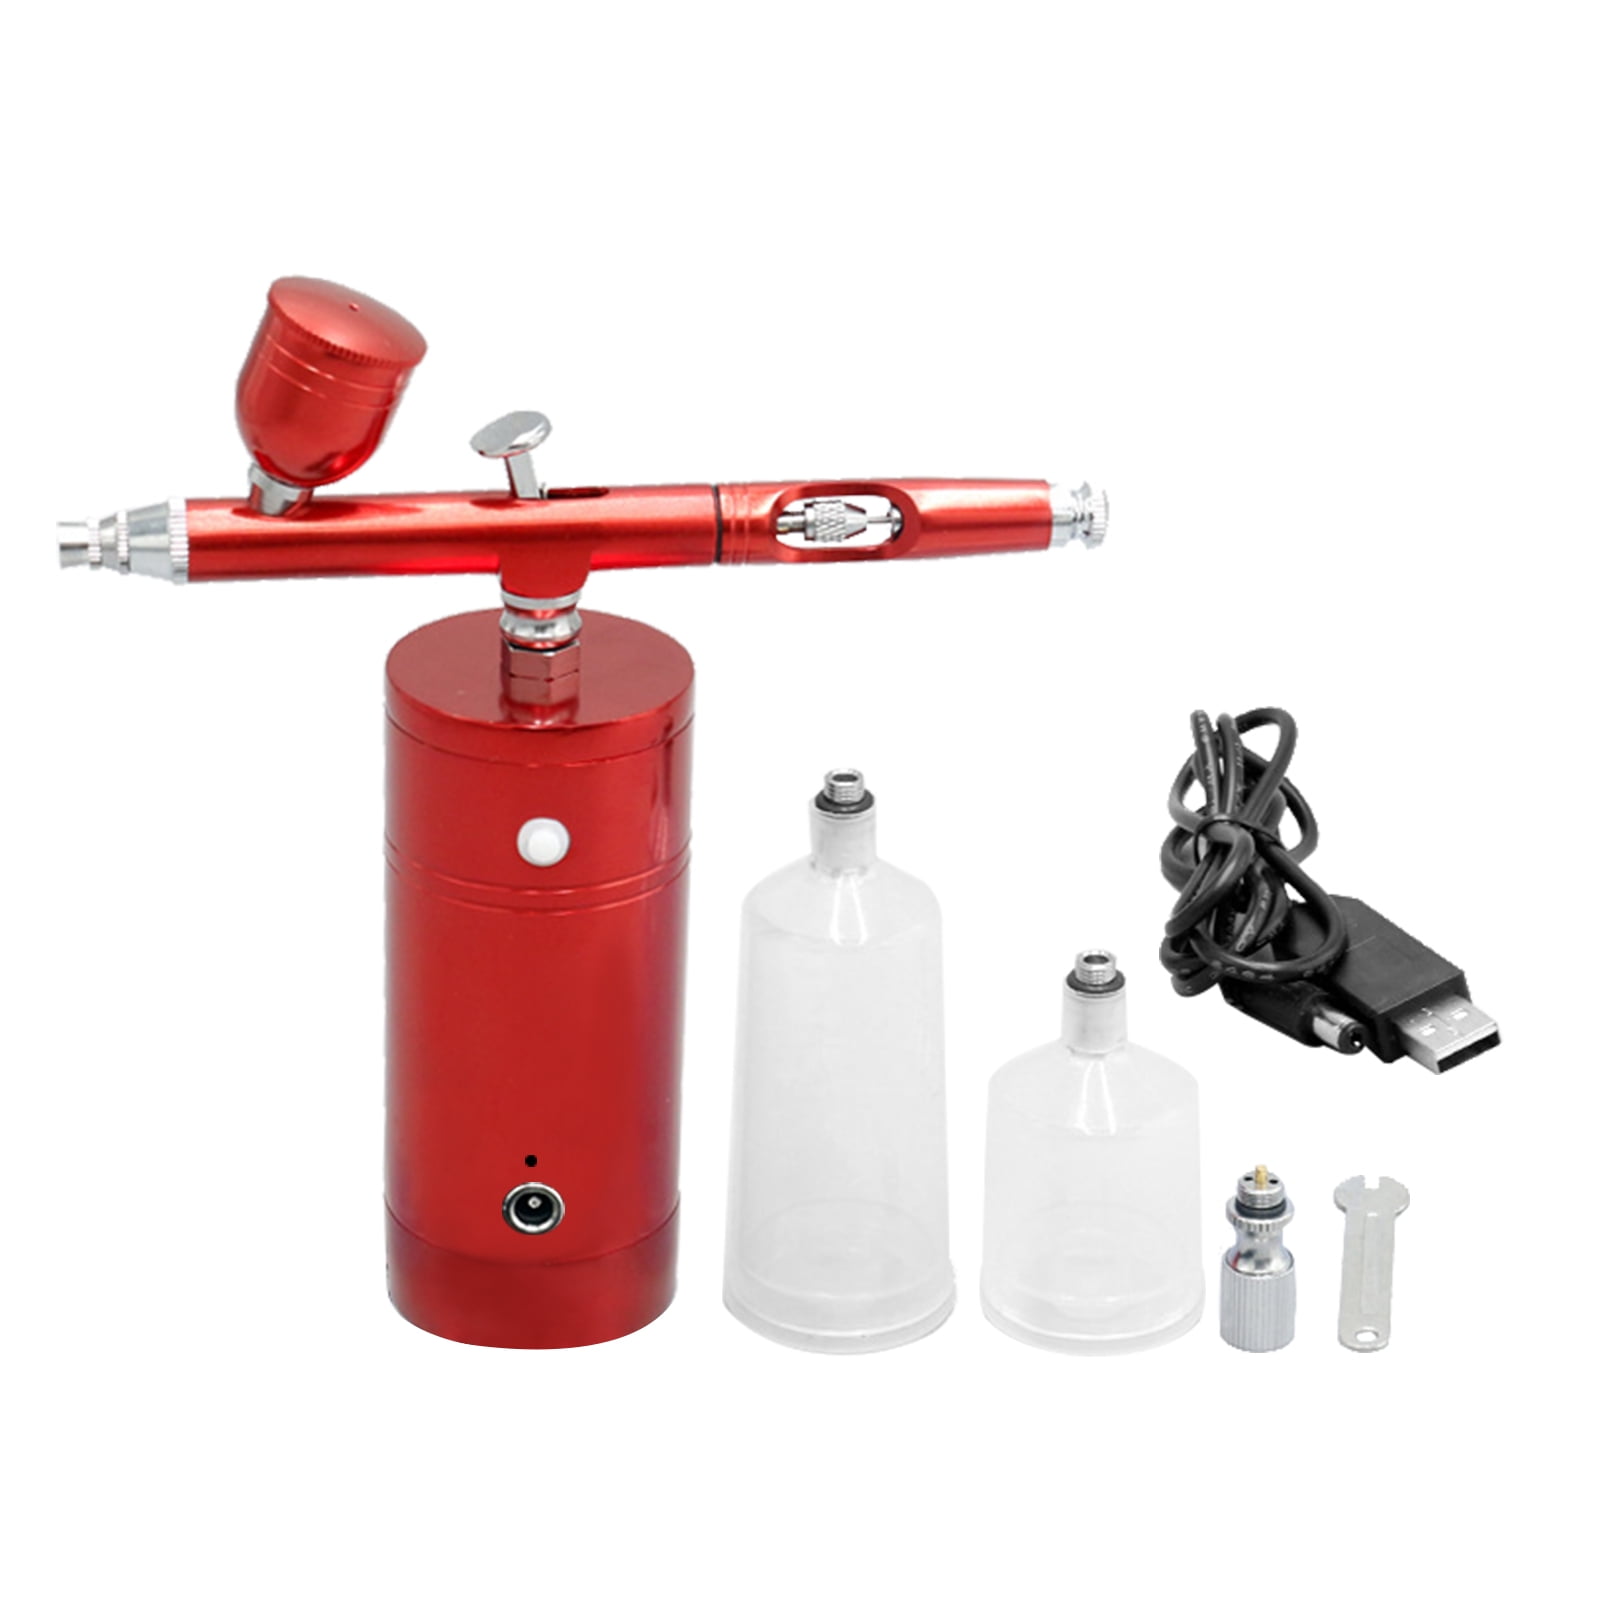 Cordless Airbrush Kit High Pressure Upgrade Compressor USB Cable